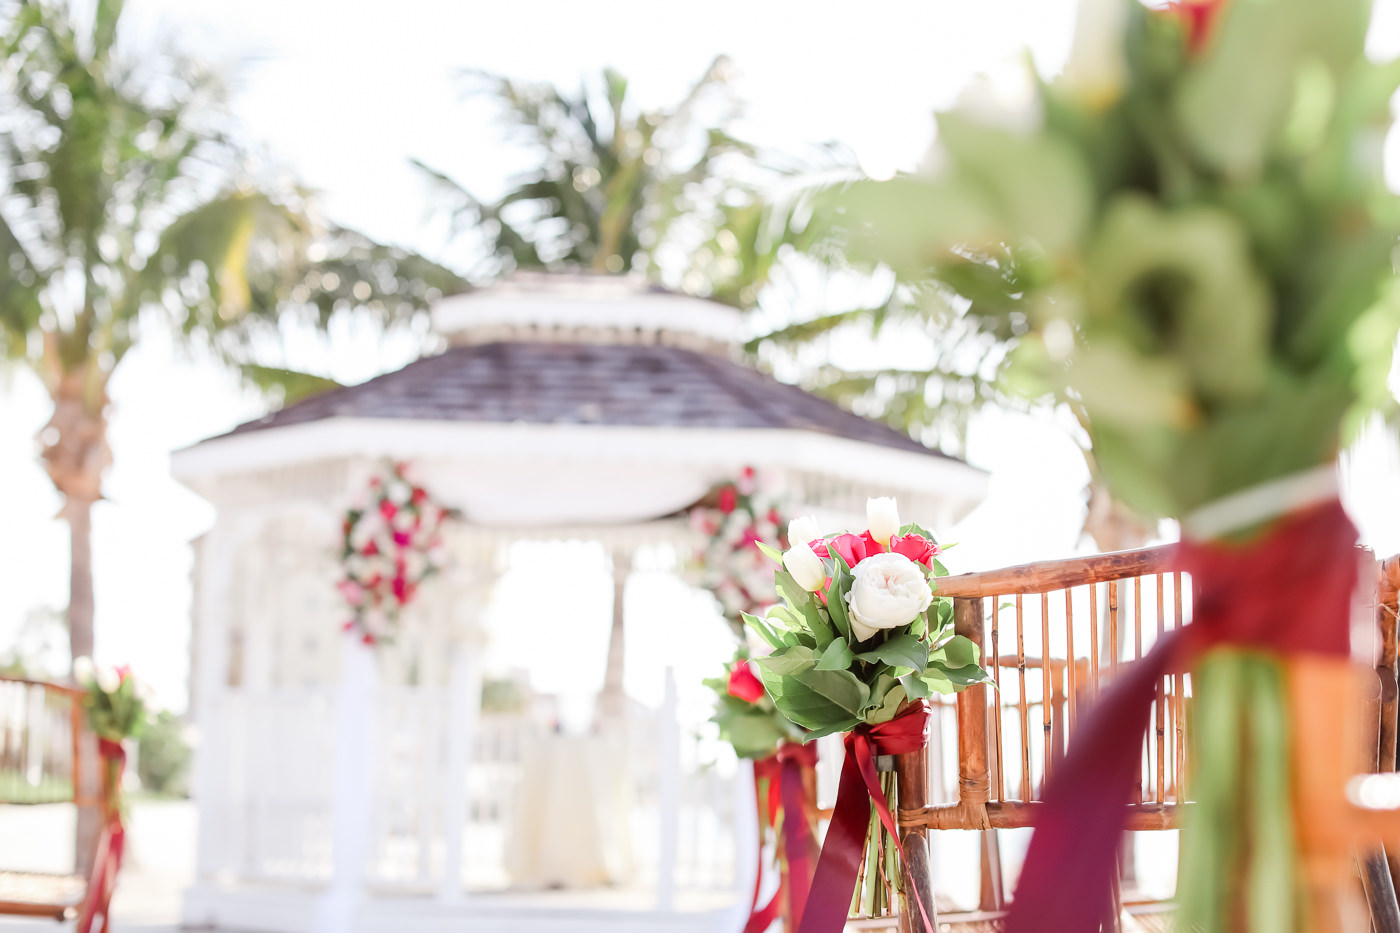 Tropical Wedding Ceremony Decor, White Tulips, Red and Greenery Floral Arrangements | Tampa Bay Wedding Photographer Lifelong Photography Studios | Waterfront St. Pete Wedding Venue Isla Del Sol Yacht and Country Club